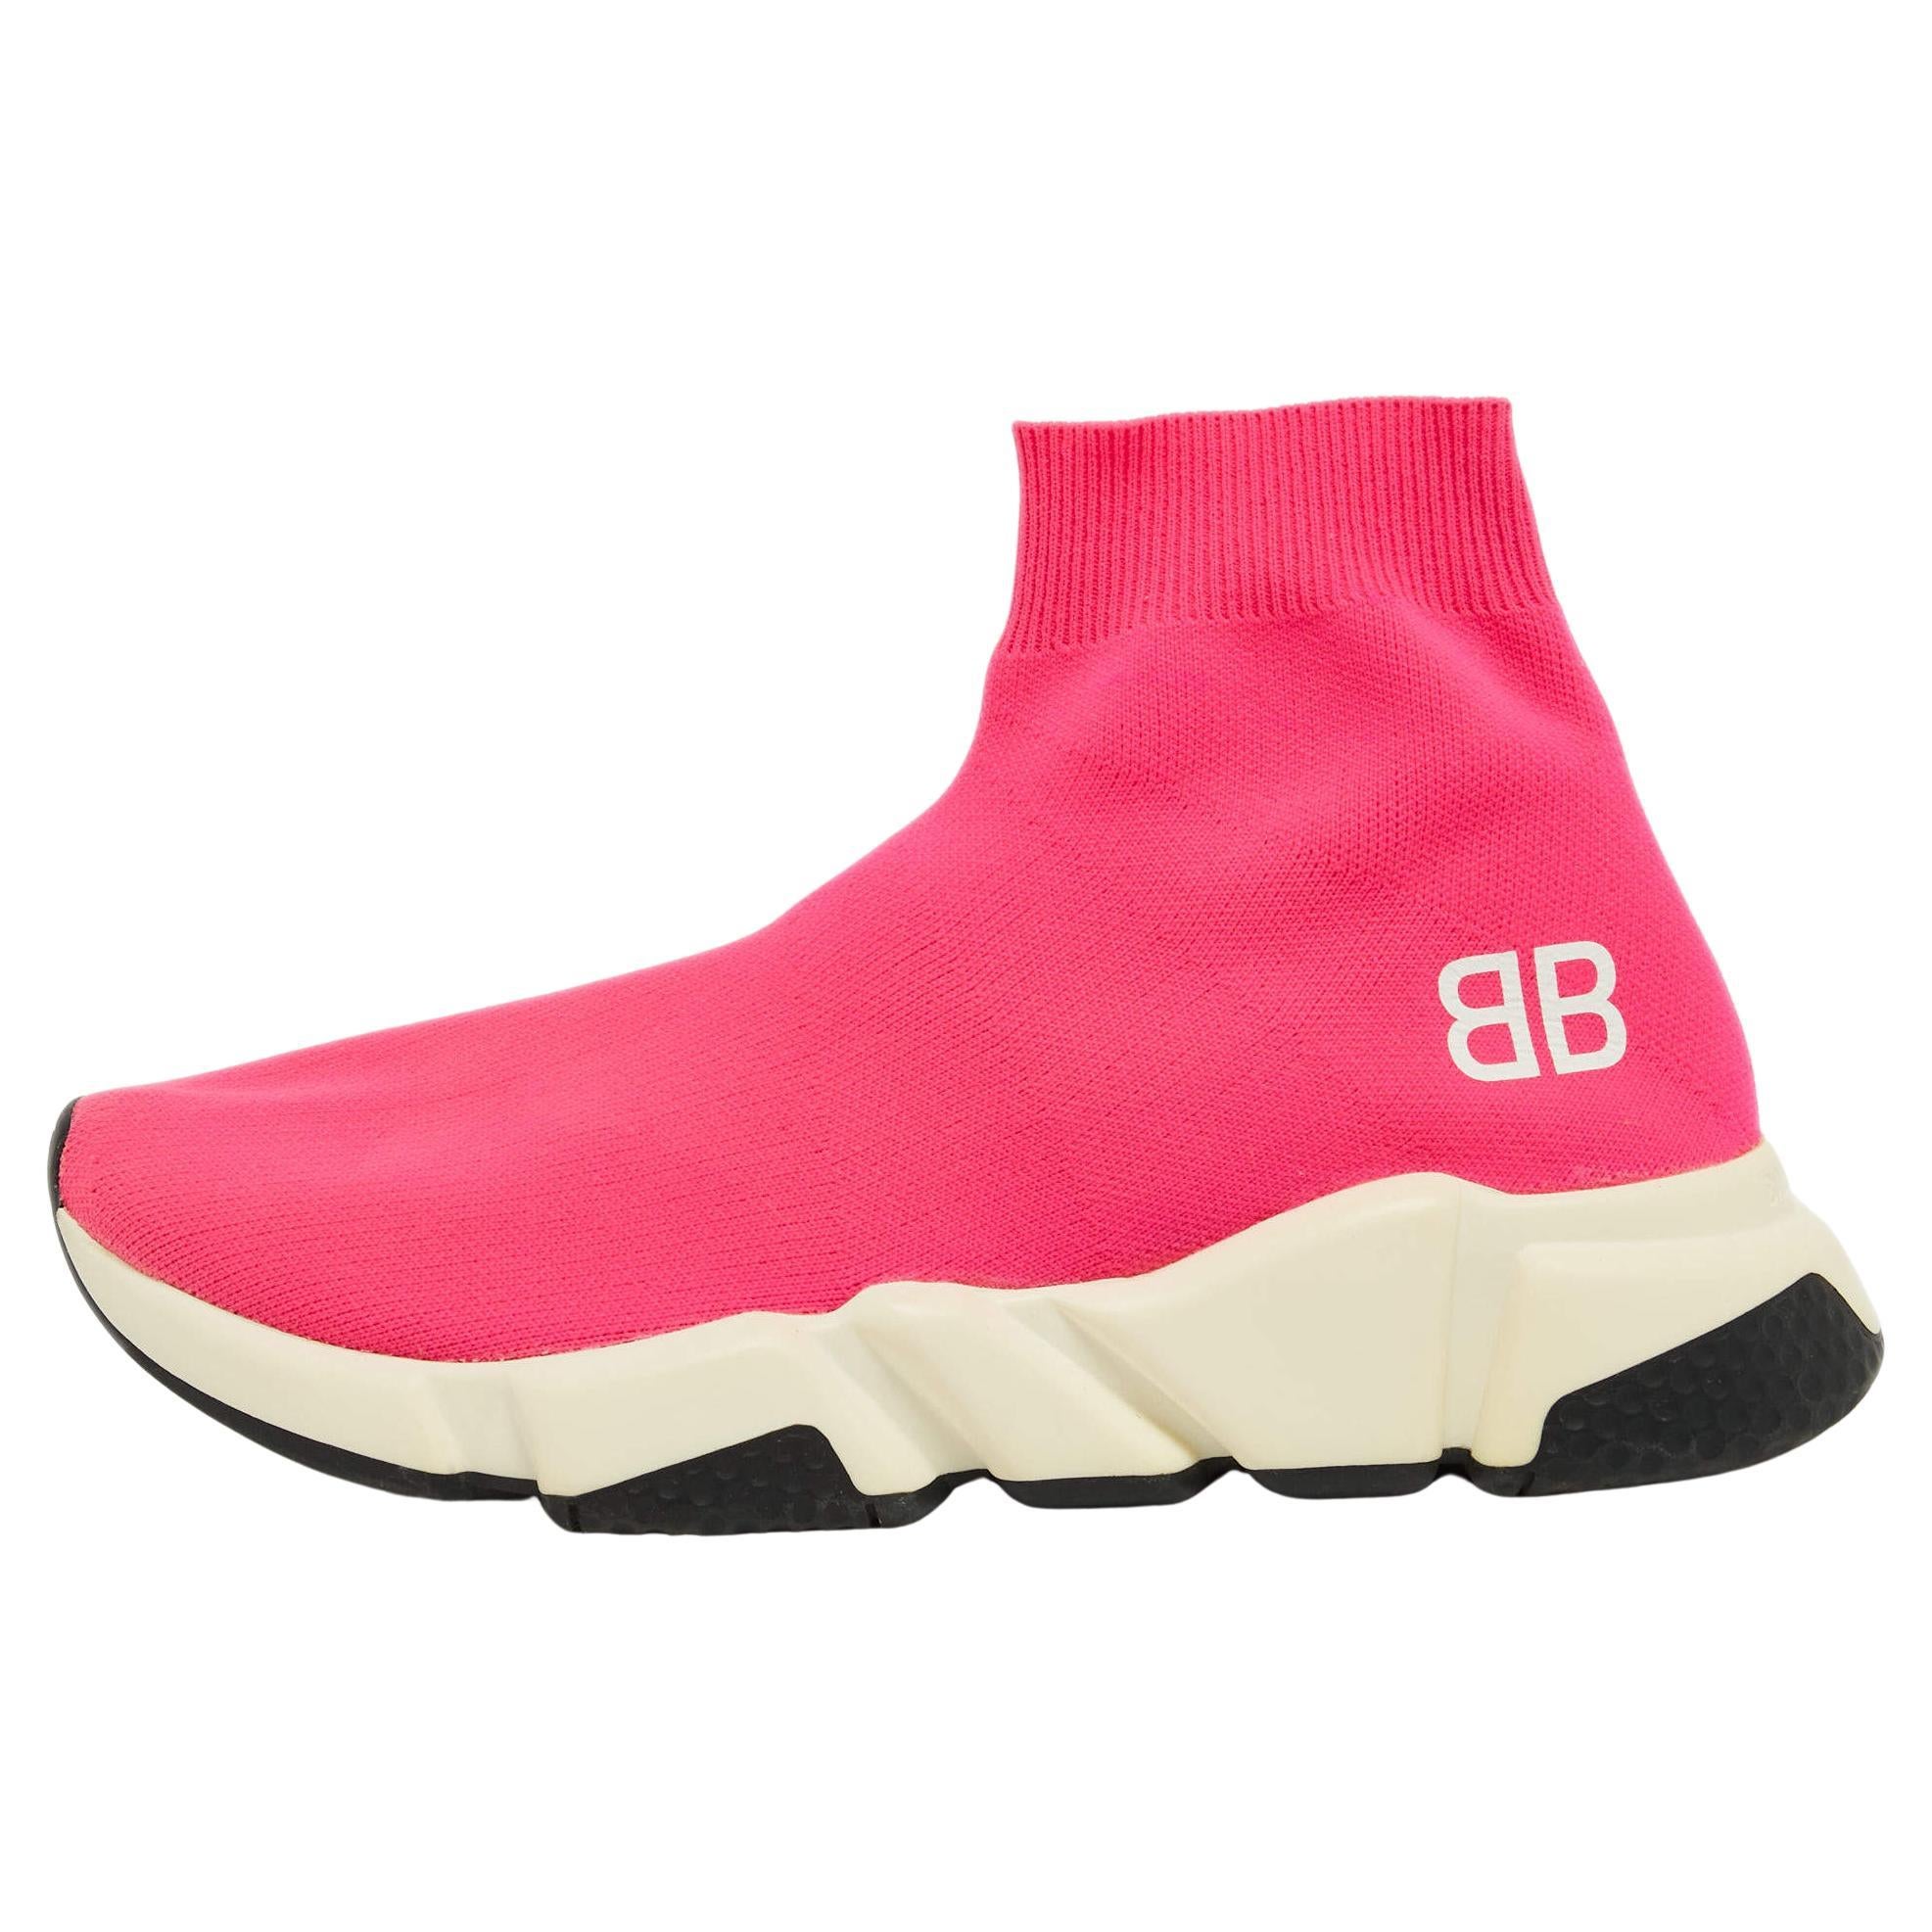 Balenciaga Neon Pink Knit Fabric Speed Trainer Sneakers Size 38